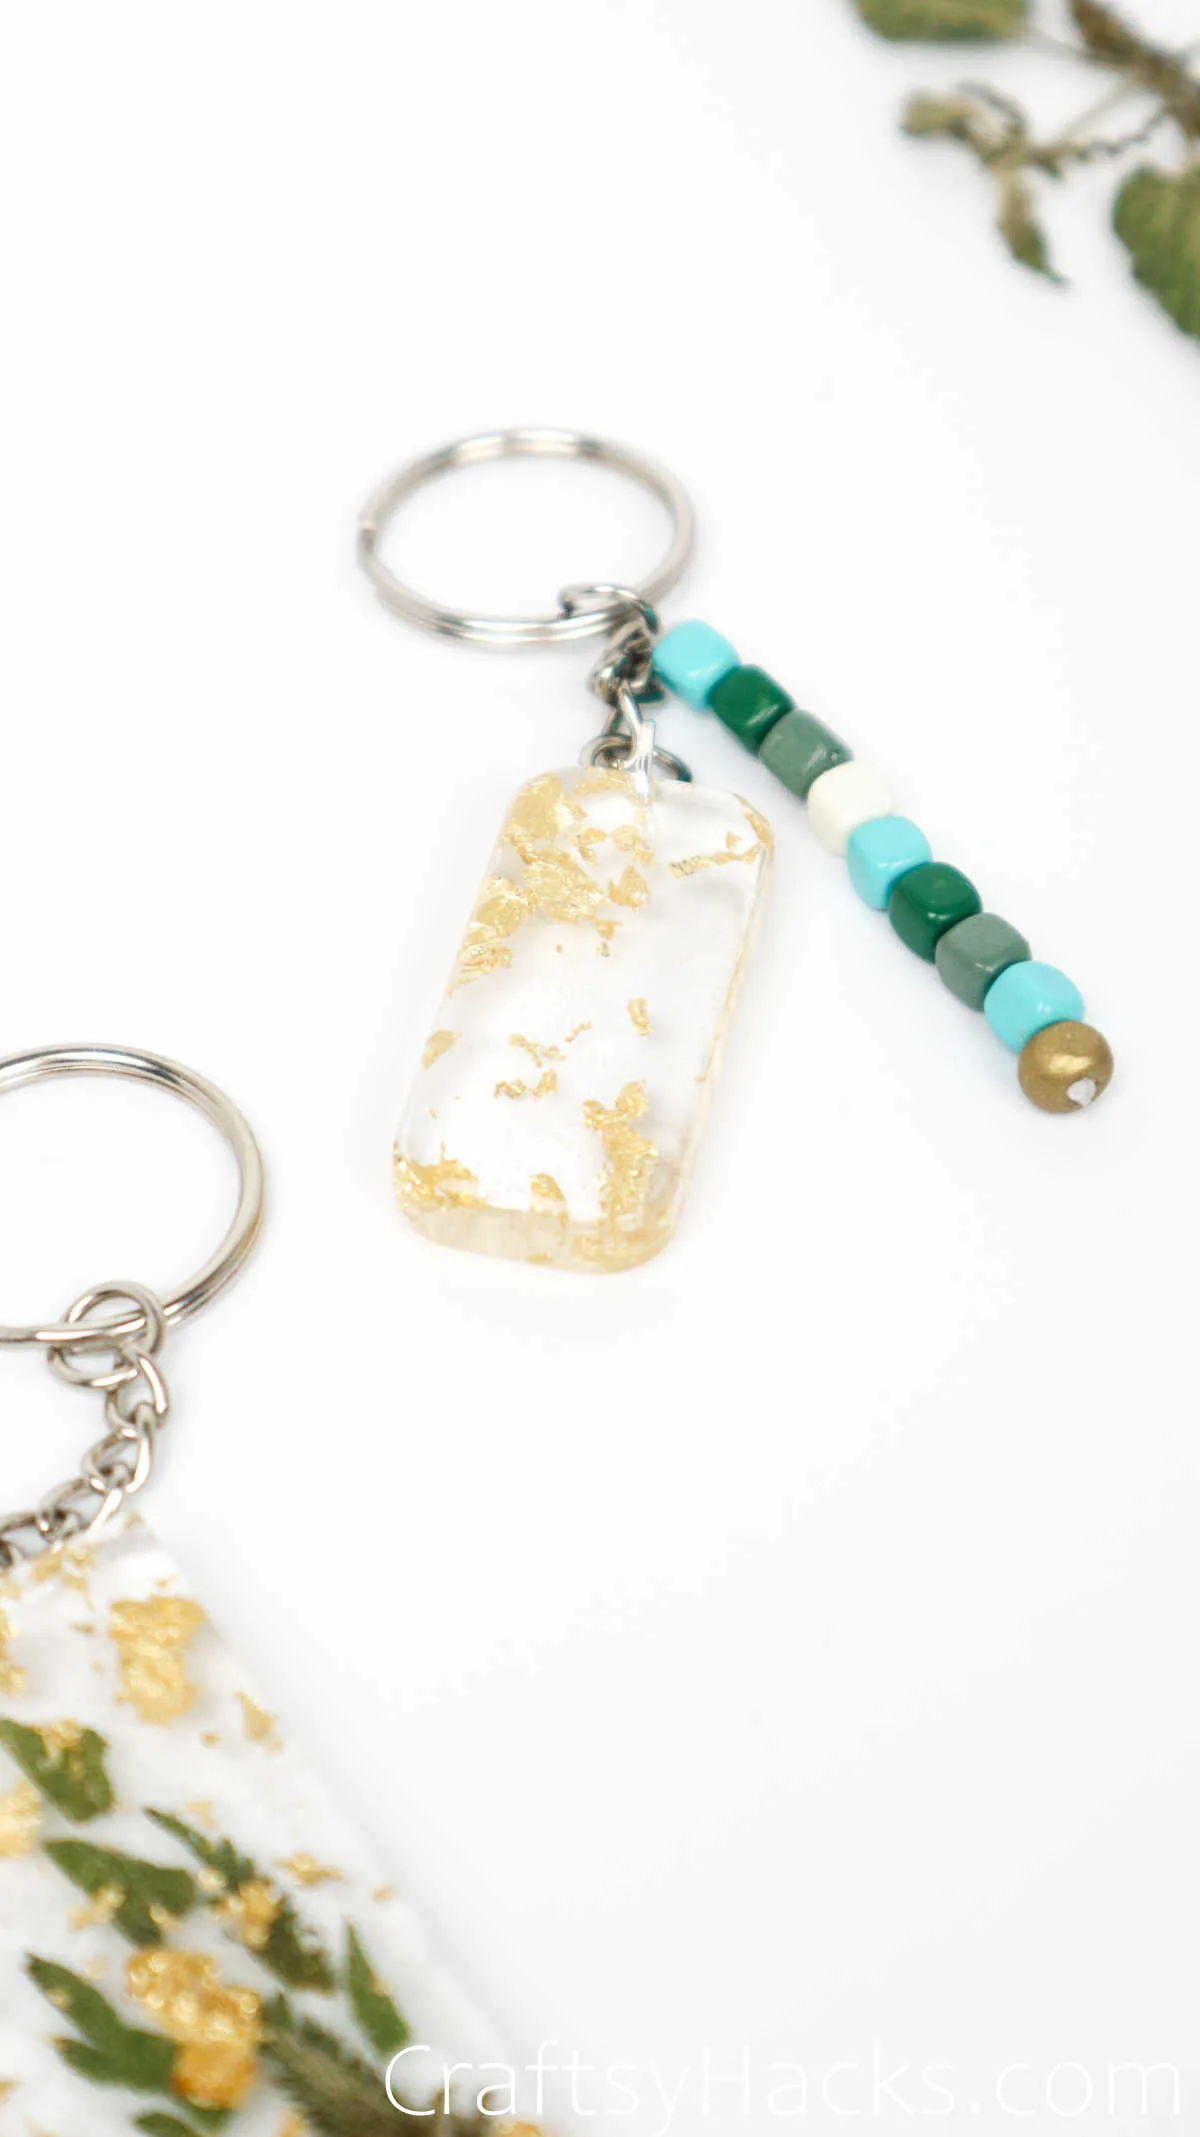 How To Make Resin Keychains